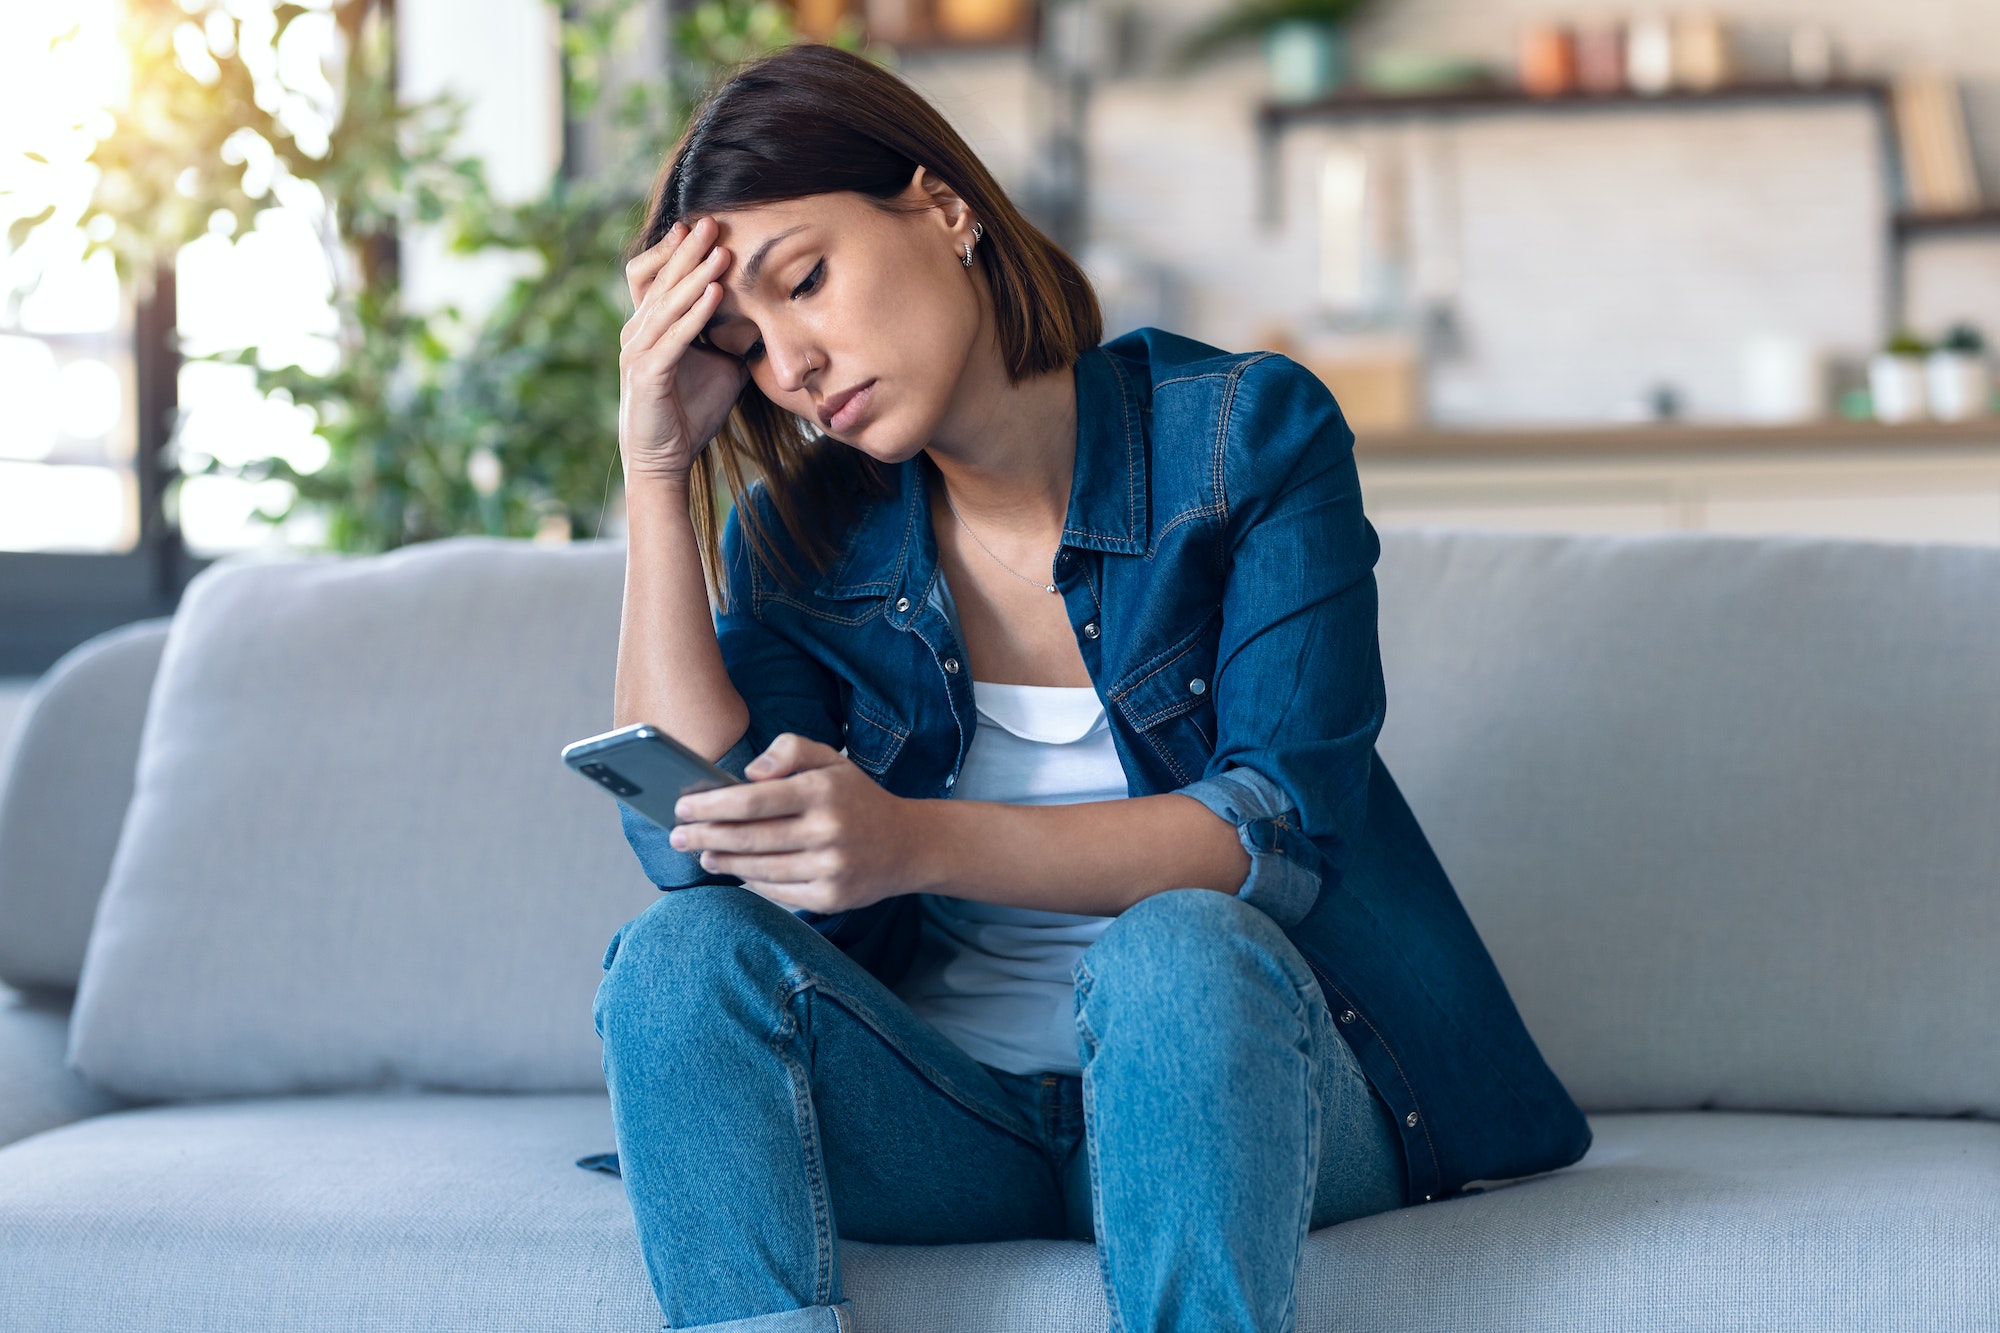 Worried young woman using her mobile phone while thinking about problems sitting on couch